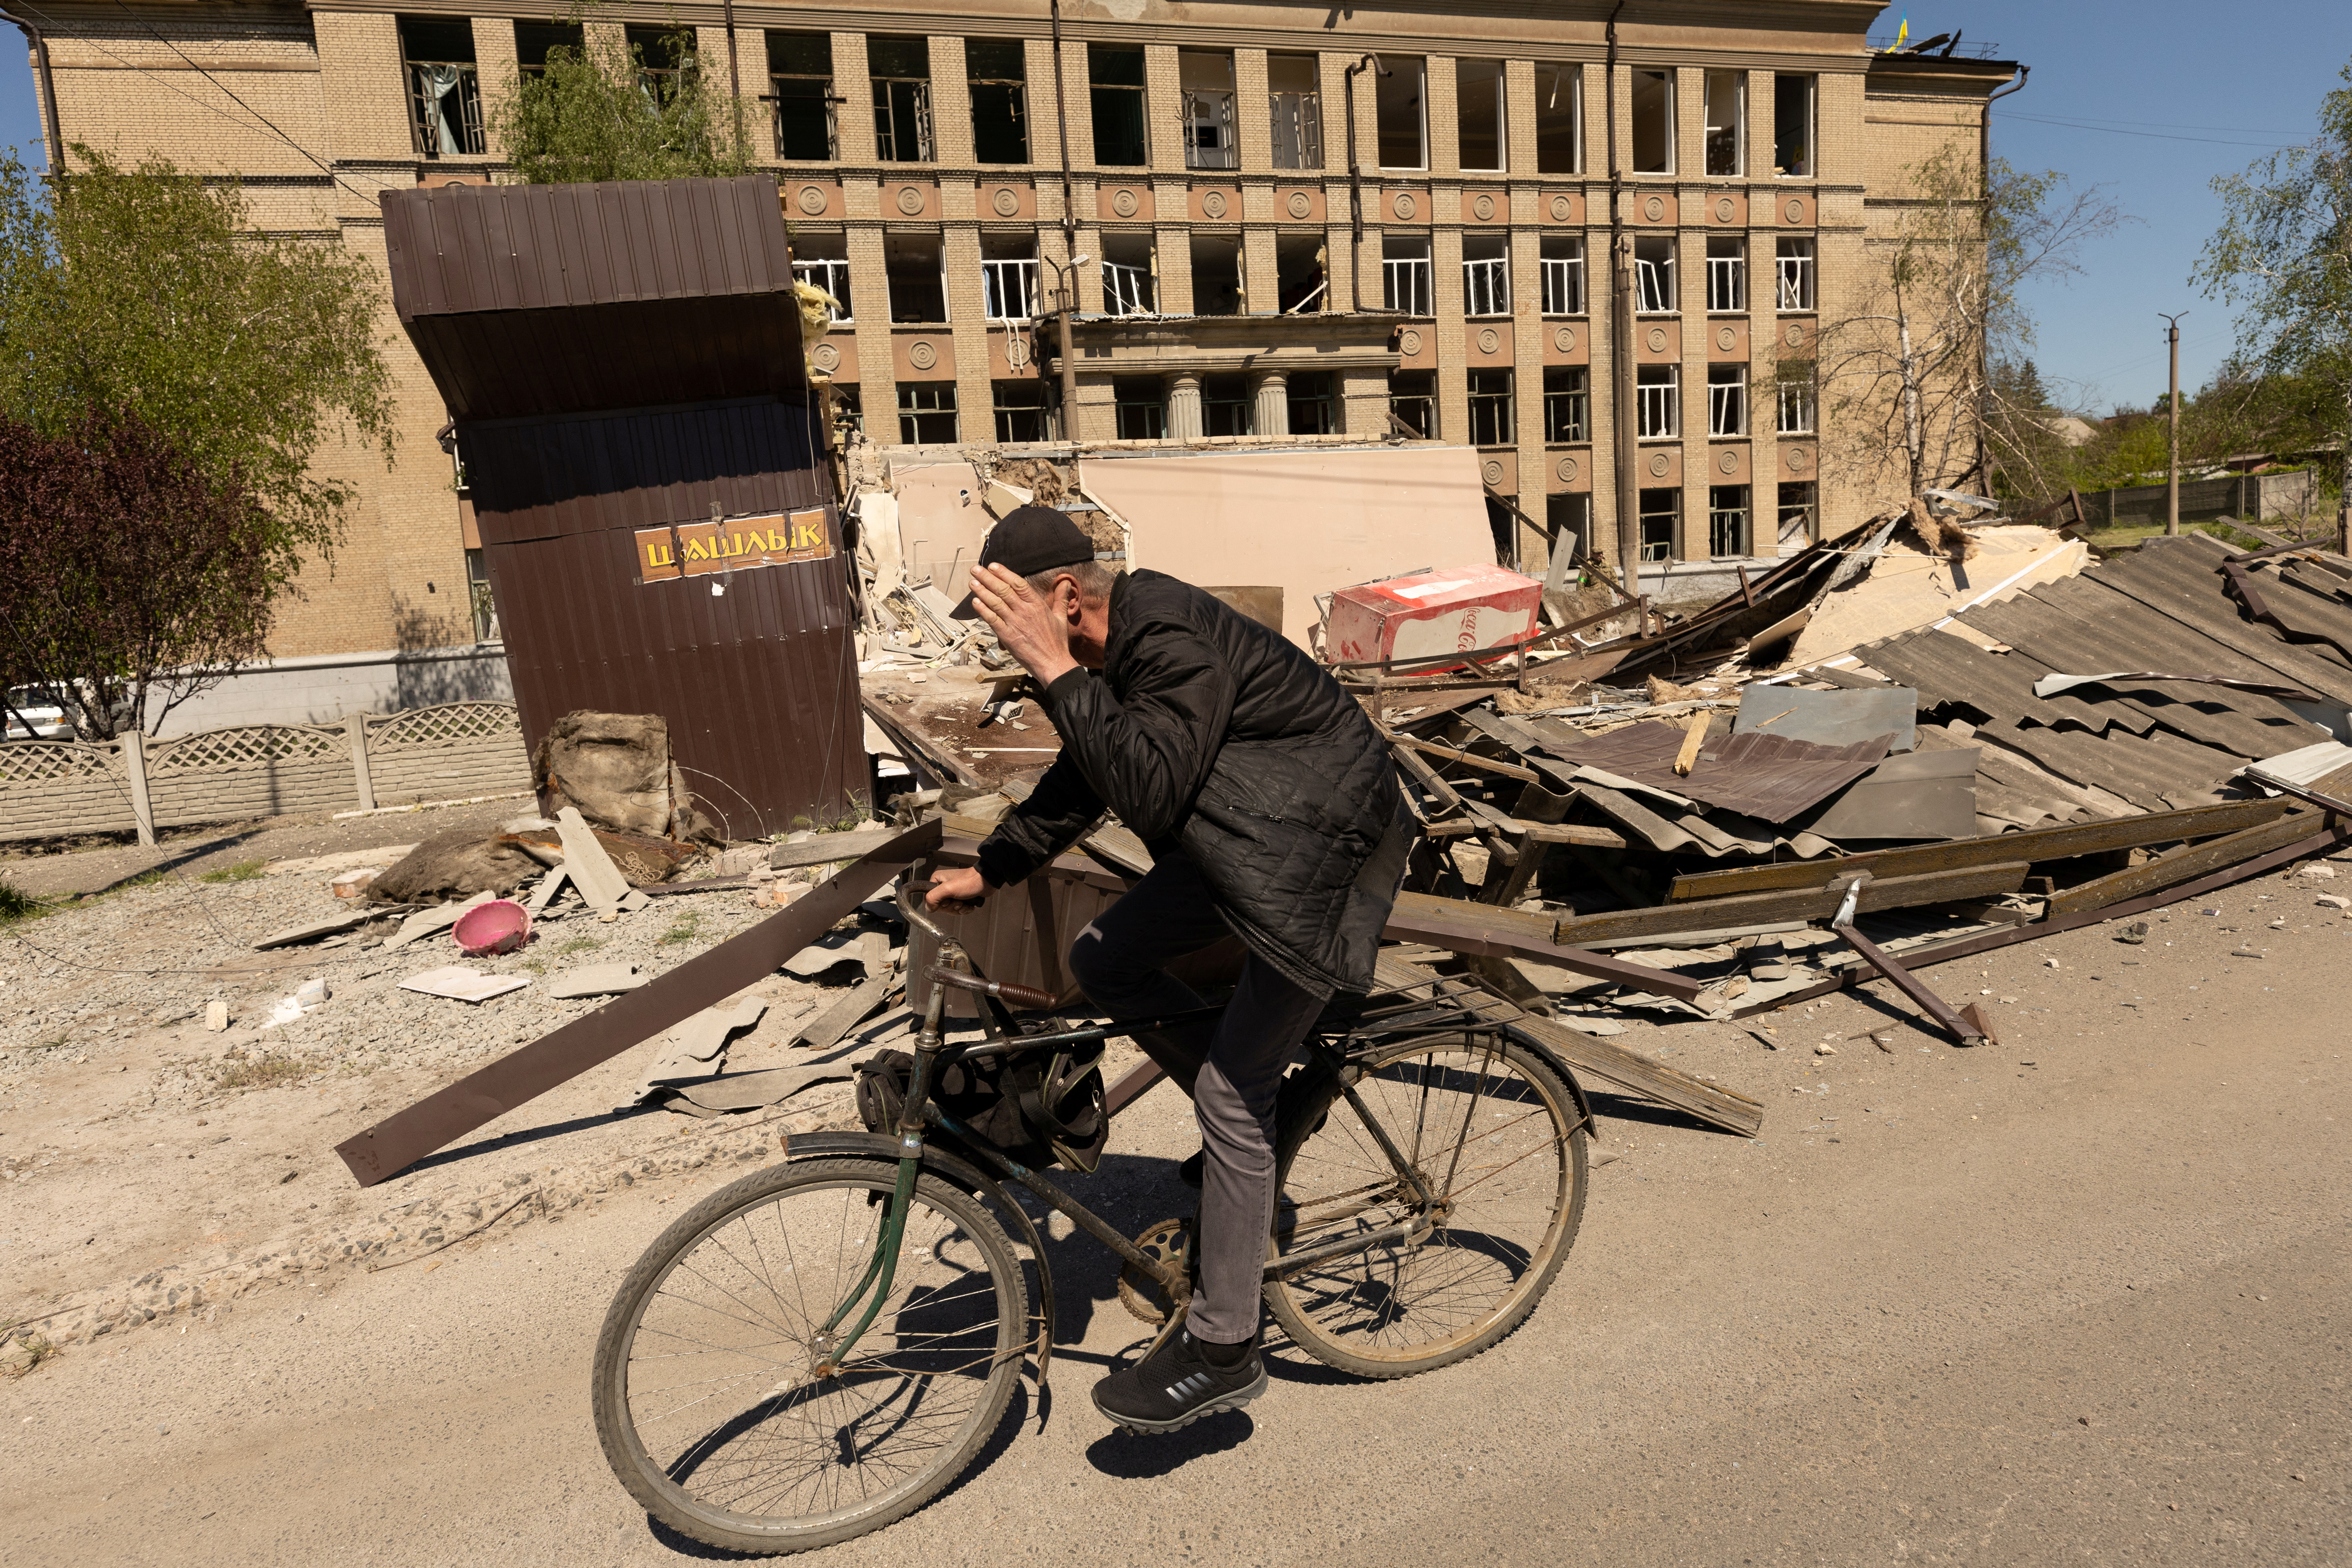 A man rides a bike in front of a school that was bombed amid Russia's invasion in Ukraine, in Kostyantynivka, in the Donetsk region